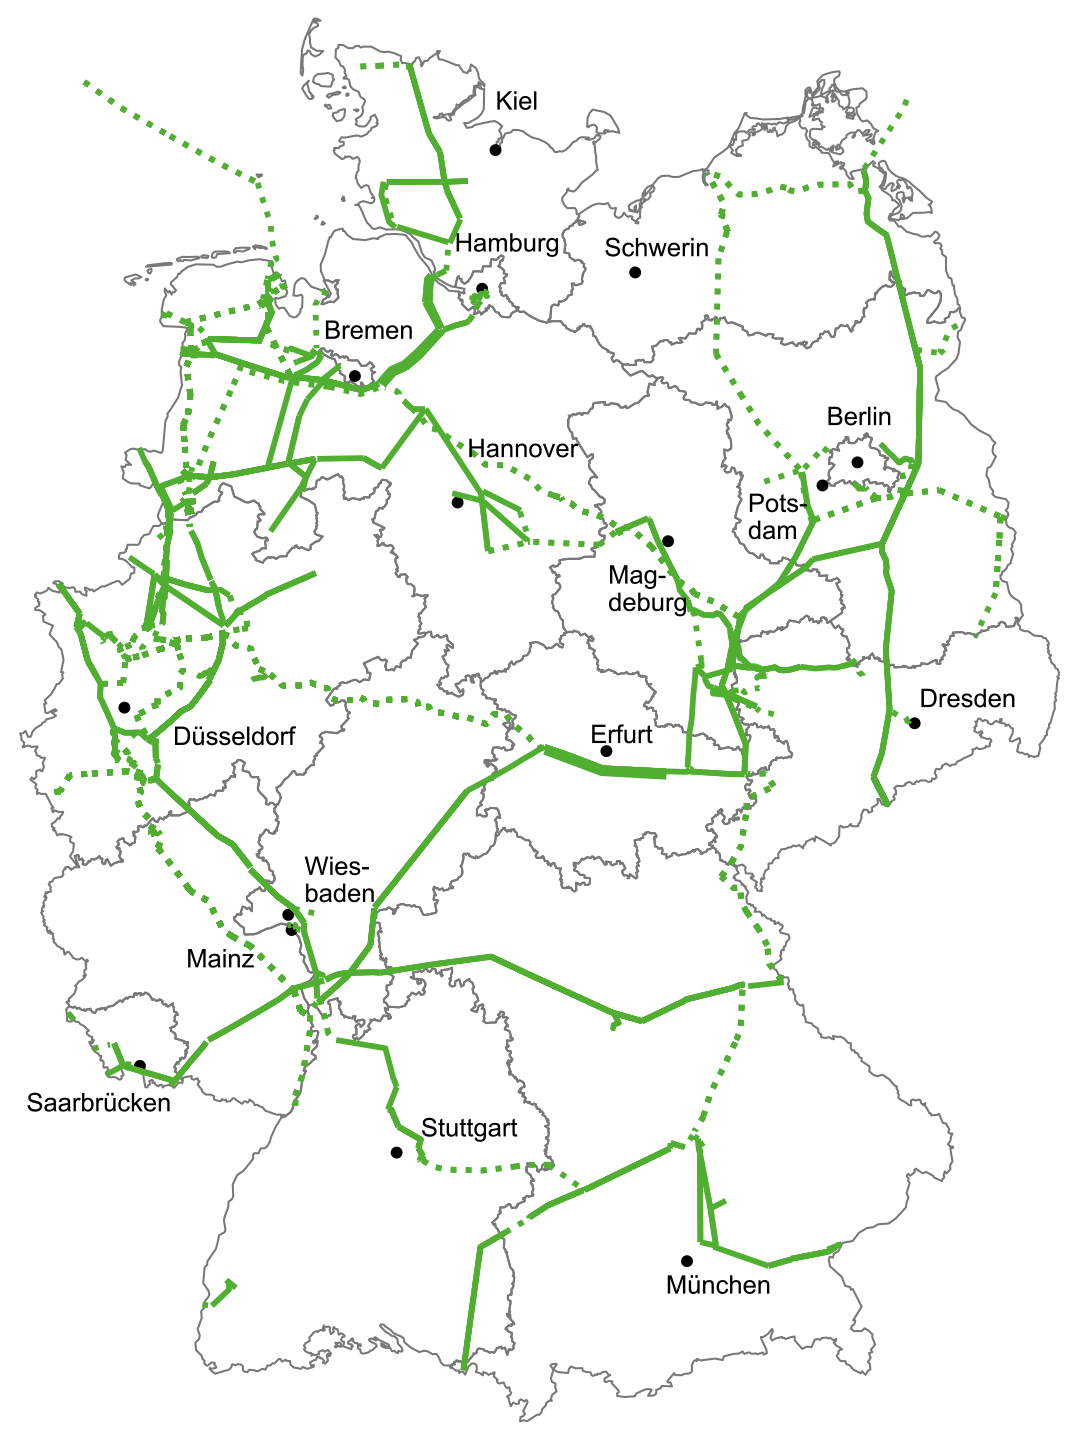 Proposed H2-Core Network for Germany.